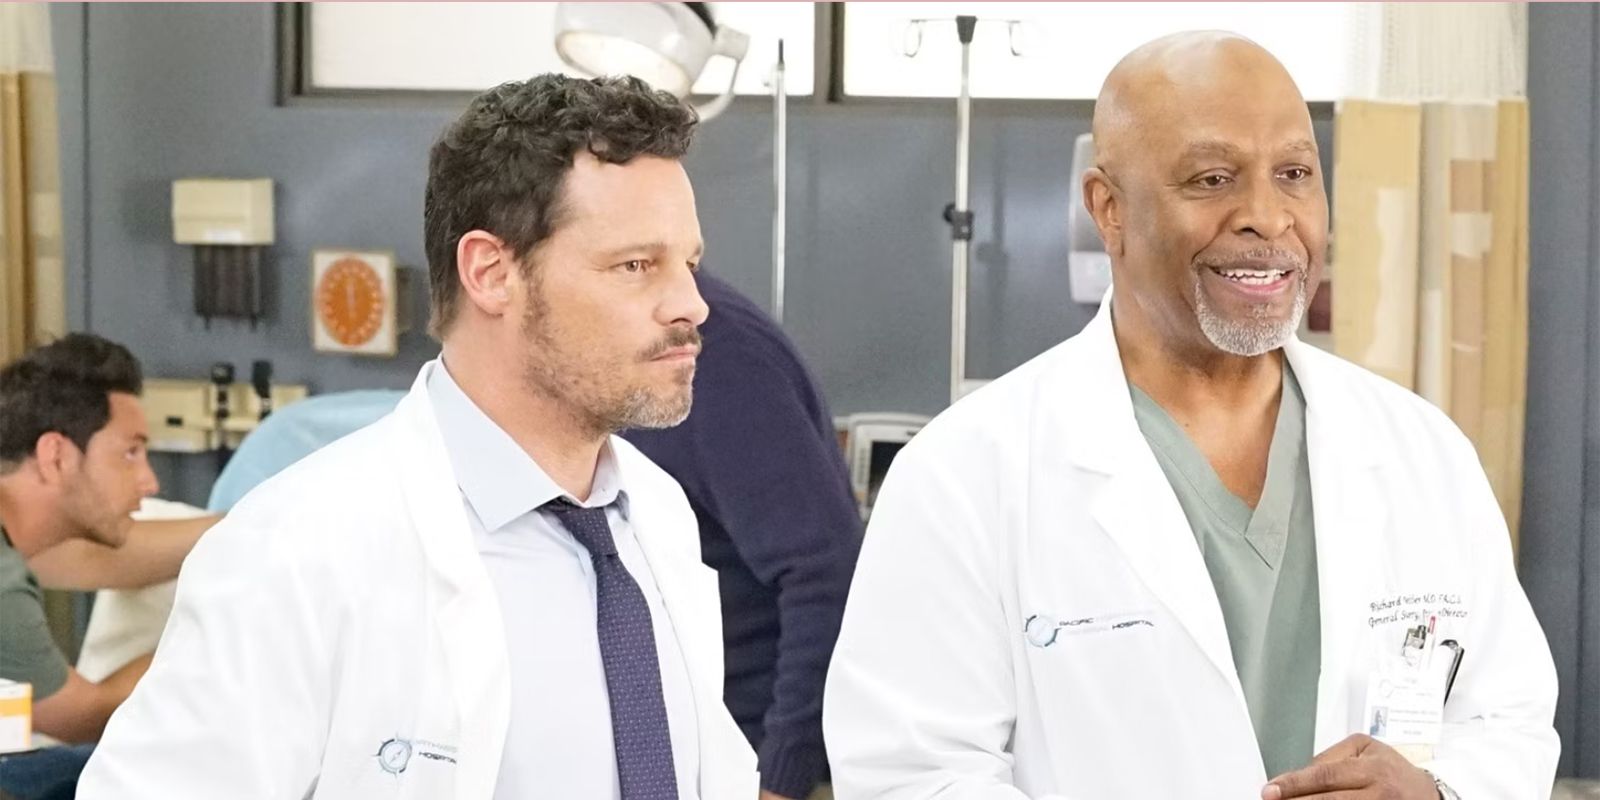 A Beloved Grey's Anatomy Character Was Way More Problematic Than Fans Will Admit